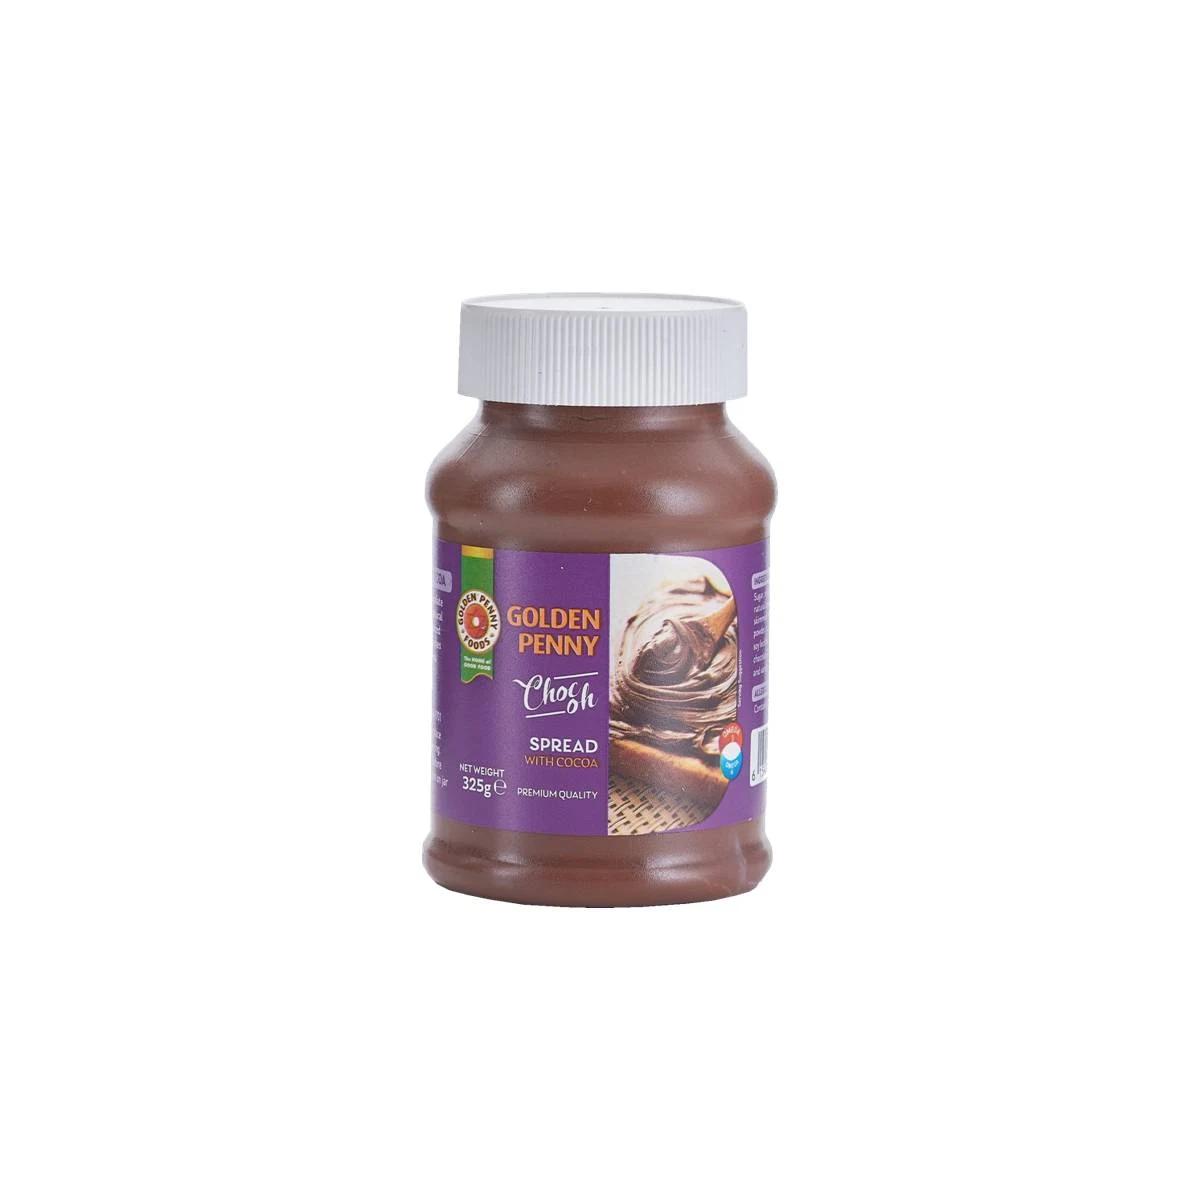 Golden Penny Chocoh Spread With Cocoa 325g on a white background